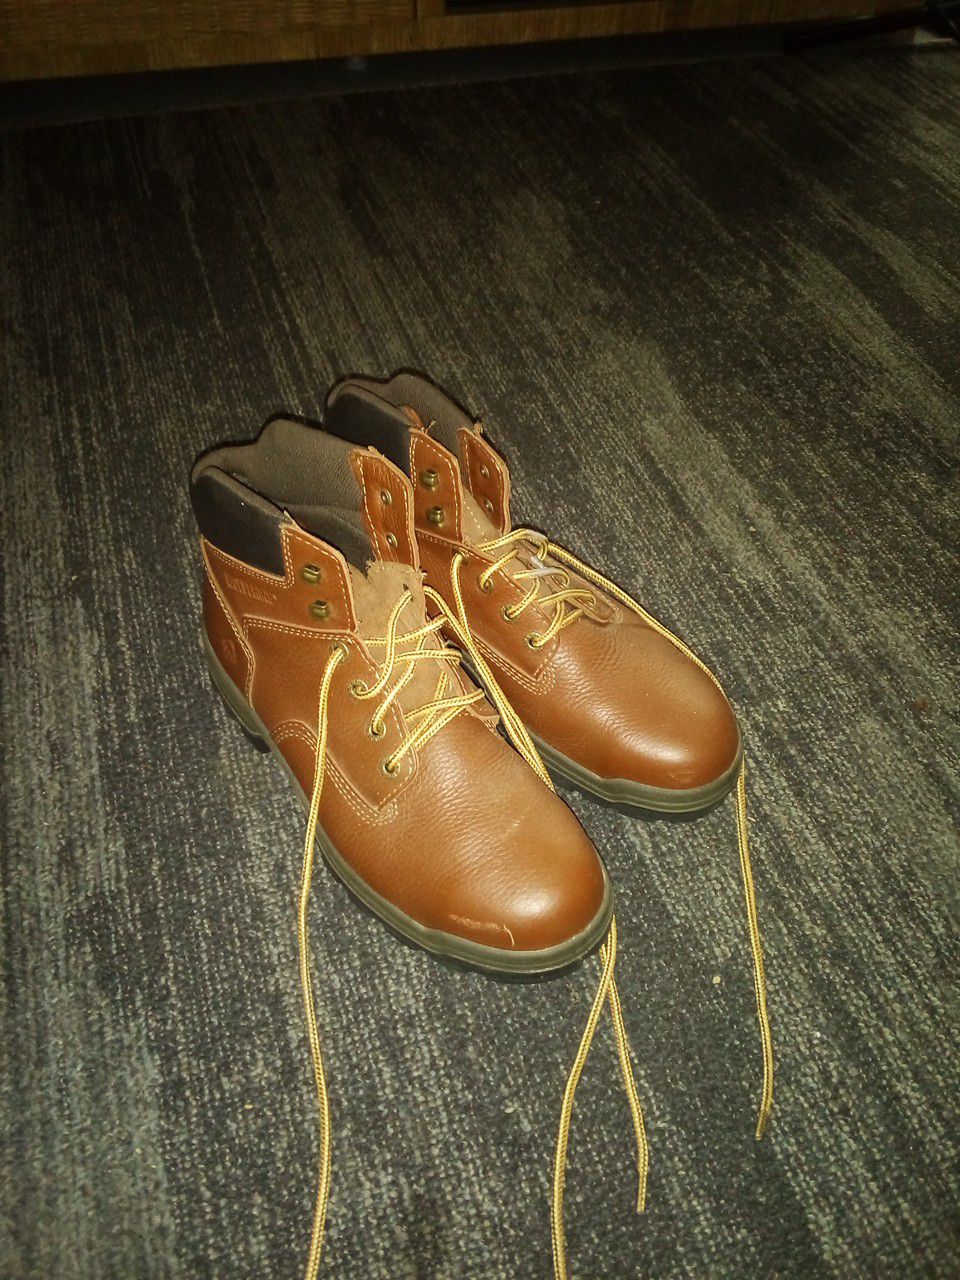 Work boots size 91/2